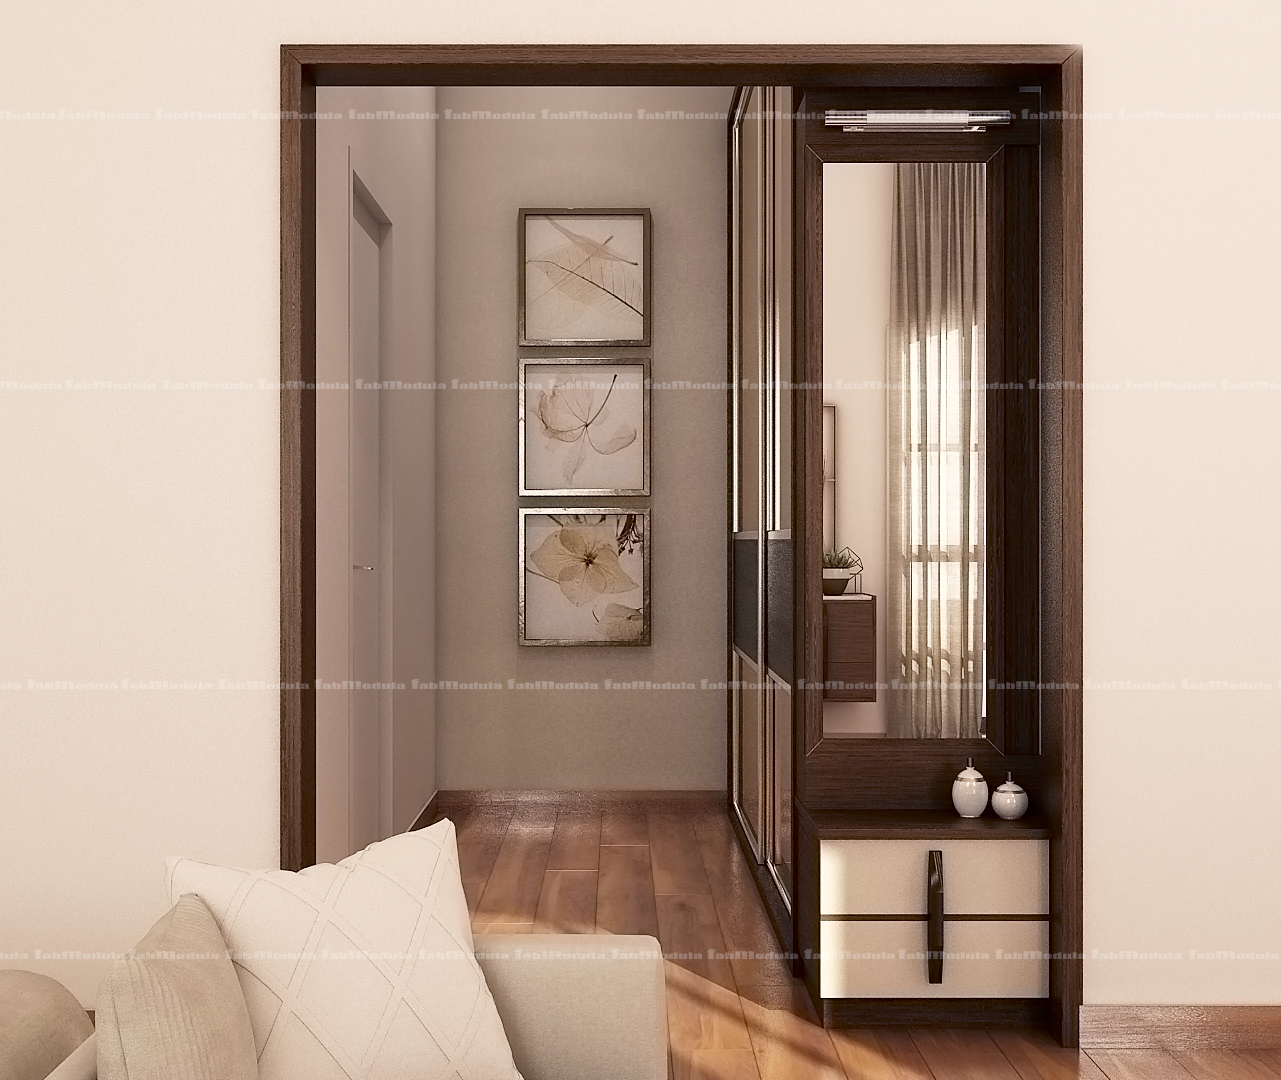 FabModula interior designer products walk in wardrobe with open space